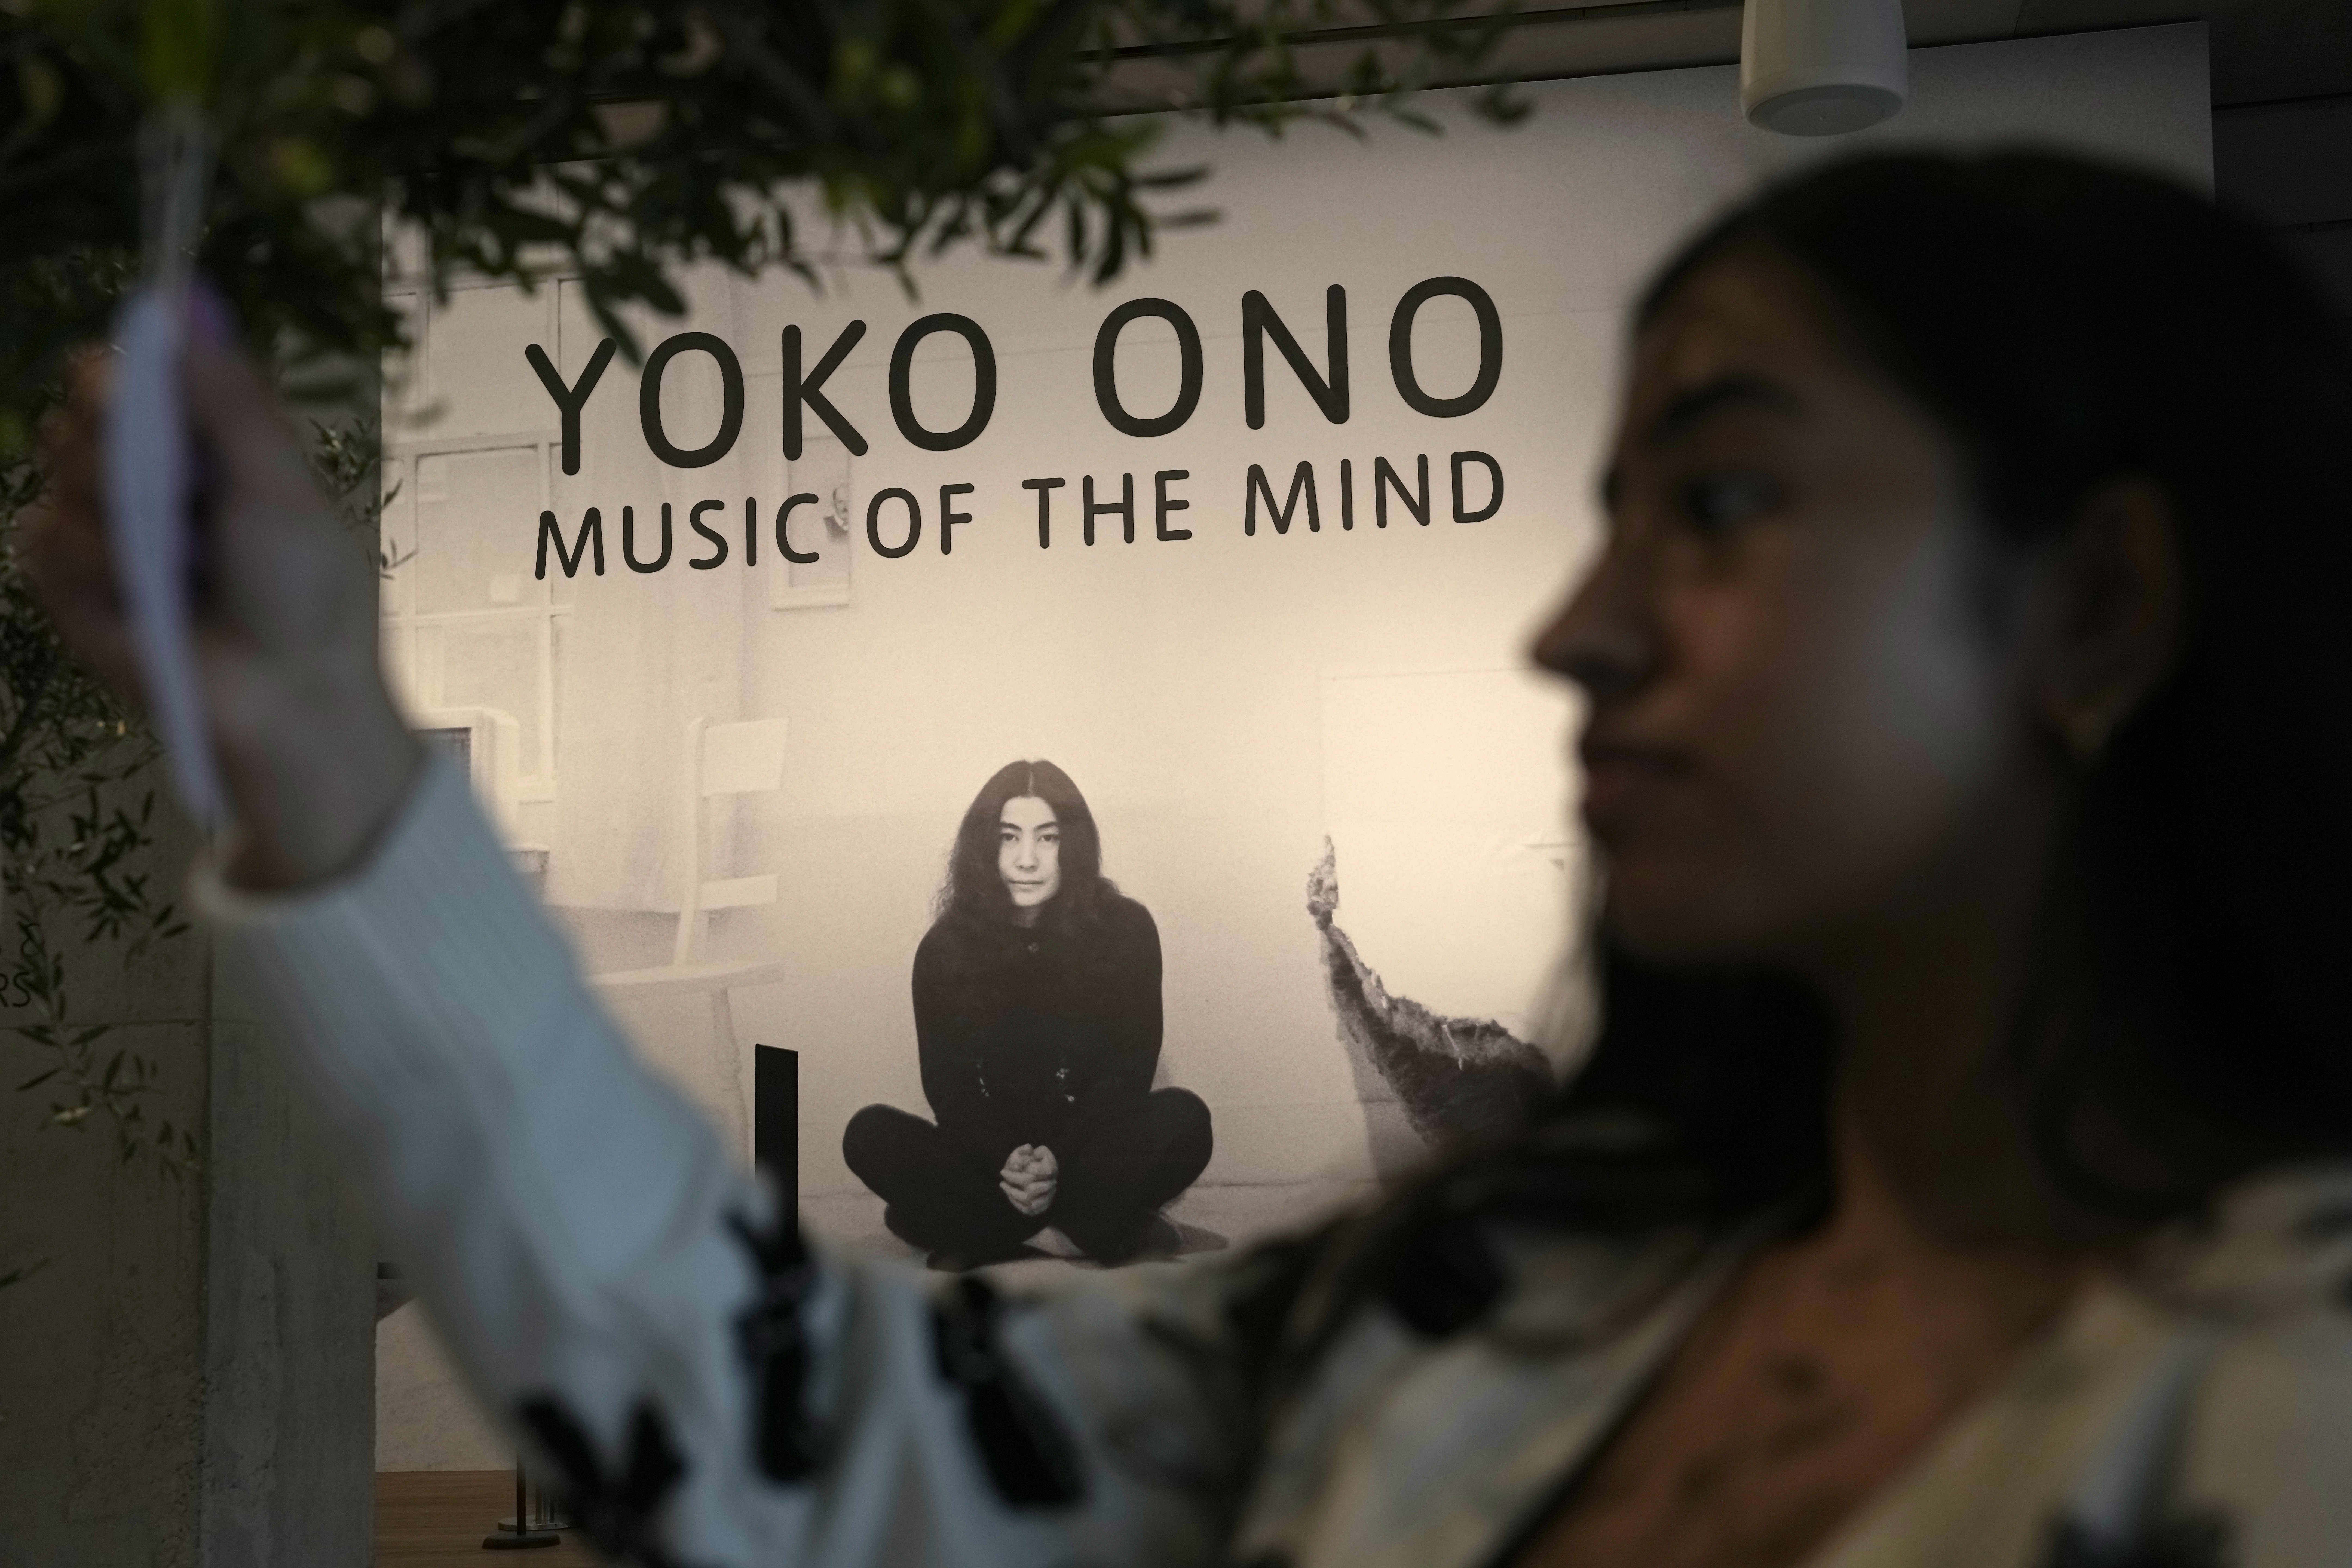 A new exhibition aims to bring Yoko Ono's art out of John Lennon's shadow